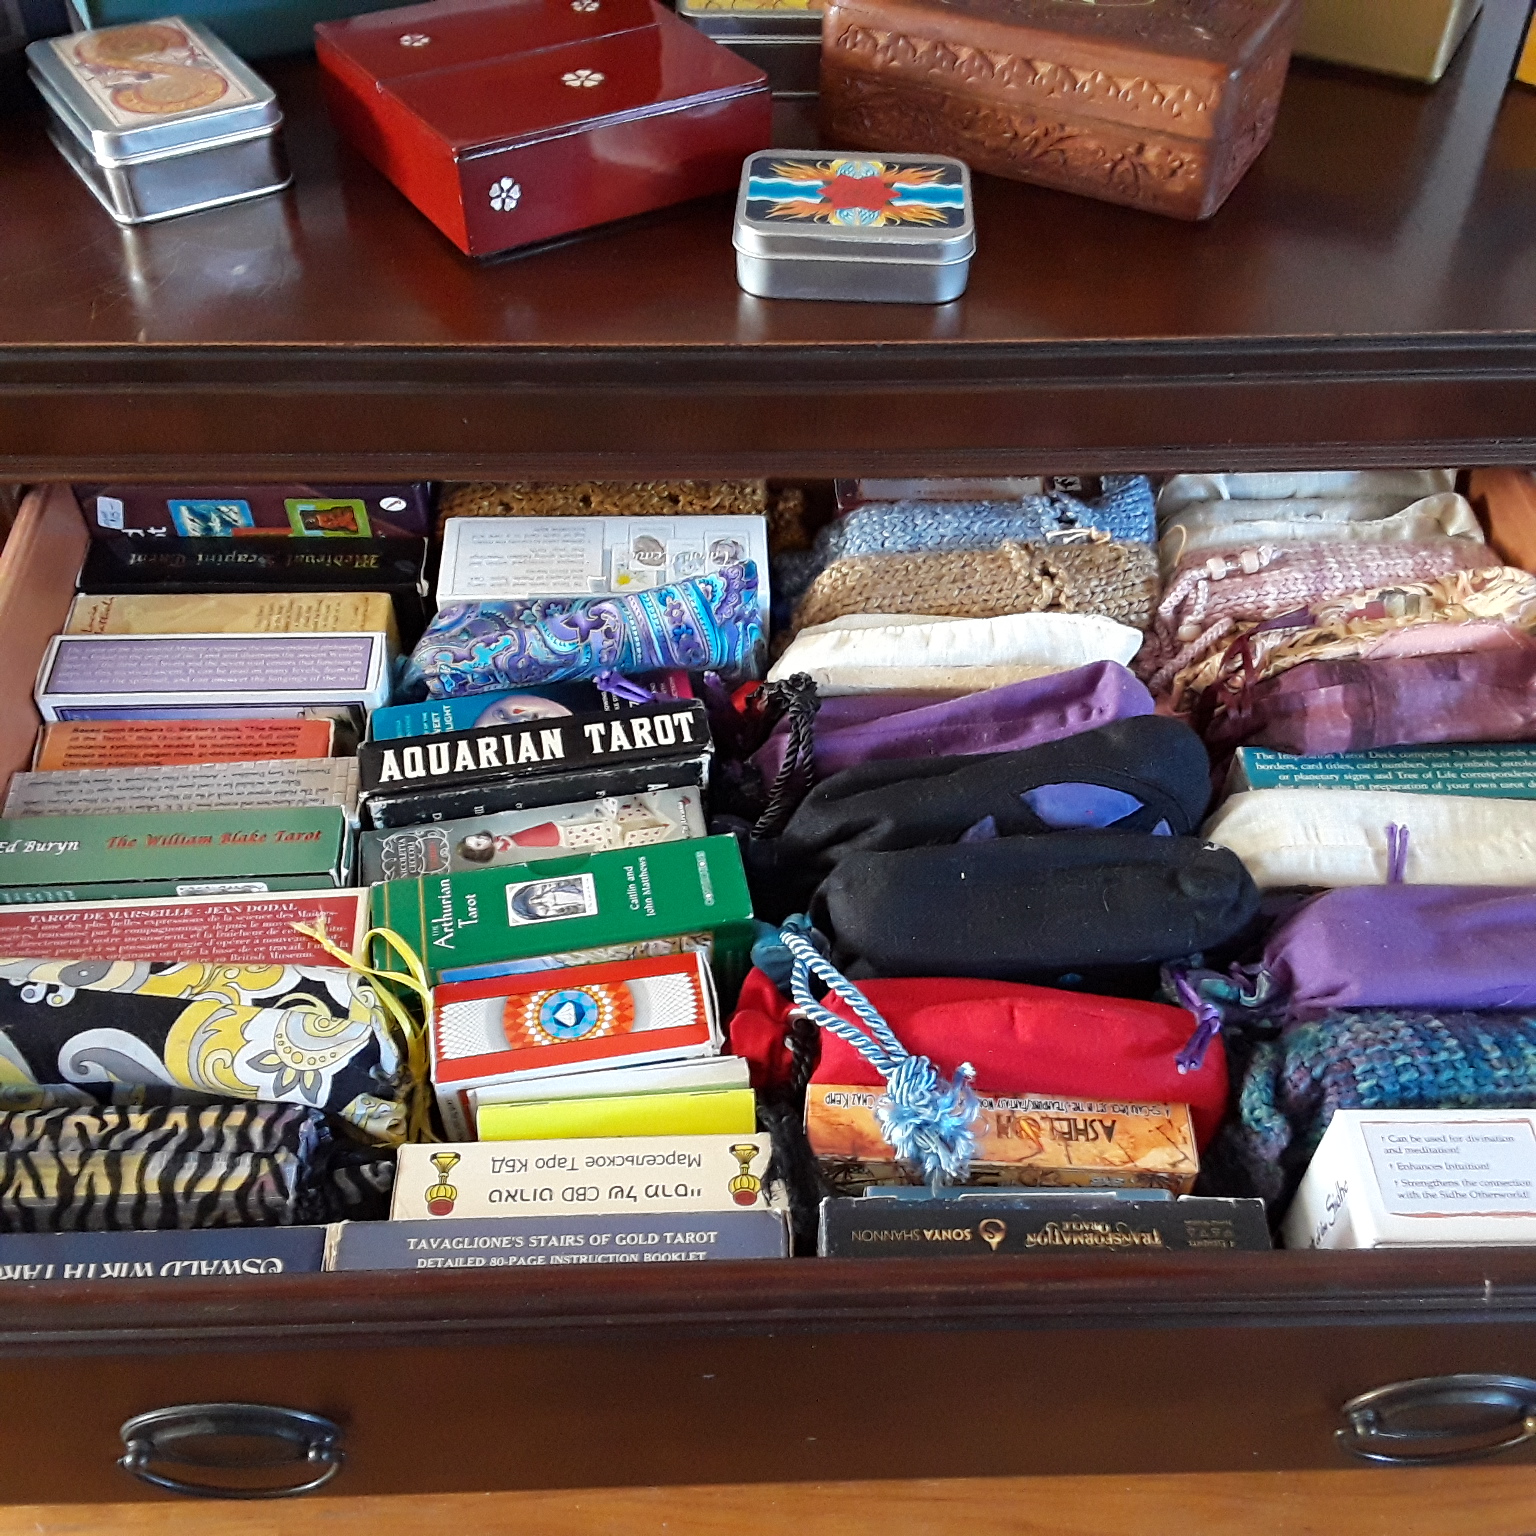 Examples of tarot storage including tuckboxes, sturdy commercial cardboard boxes, cotton drawstring tarot bags, handknit drawstring tarot bags, inexpensive muslin bags, hand-crocheted bag, organza bag, etc.